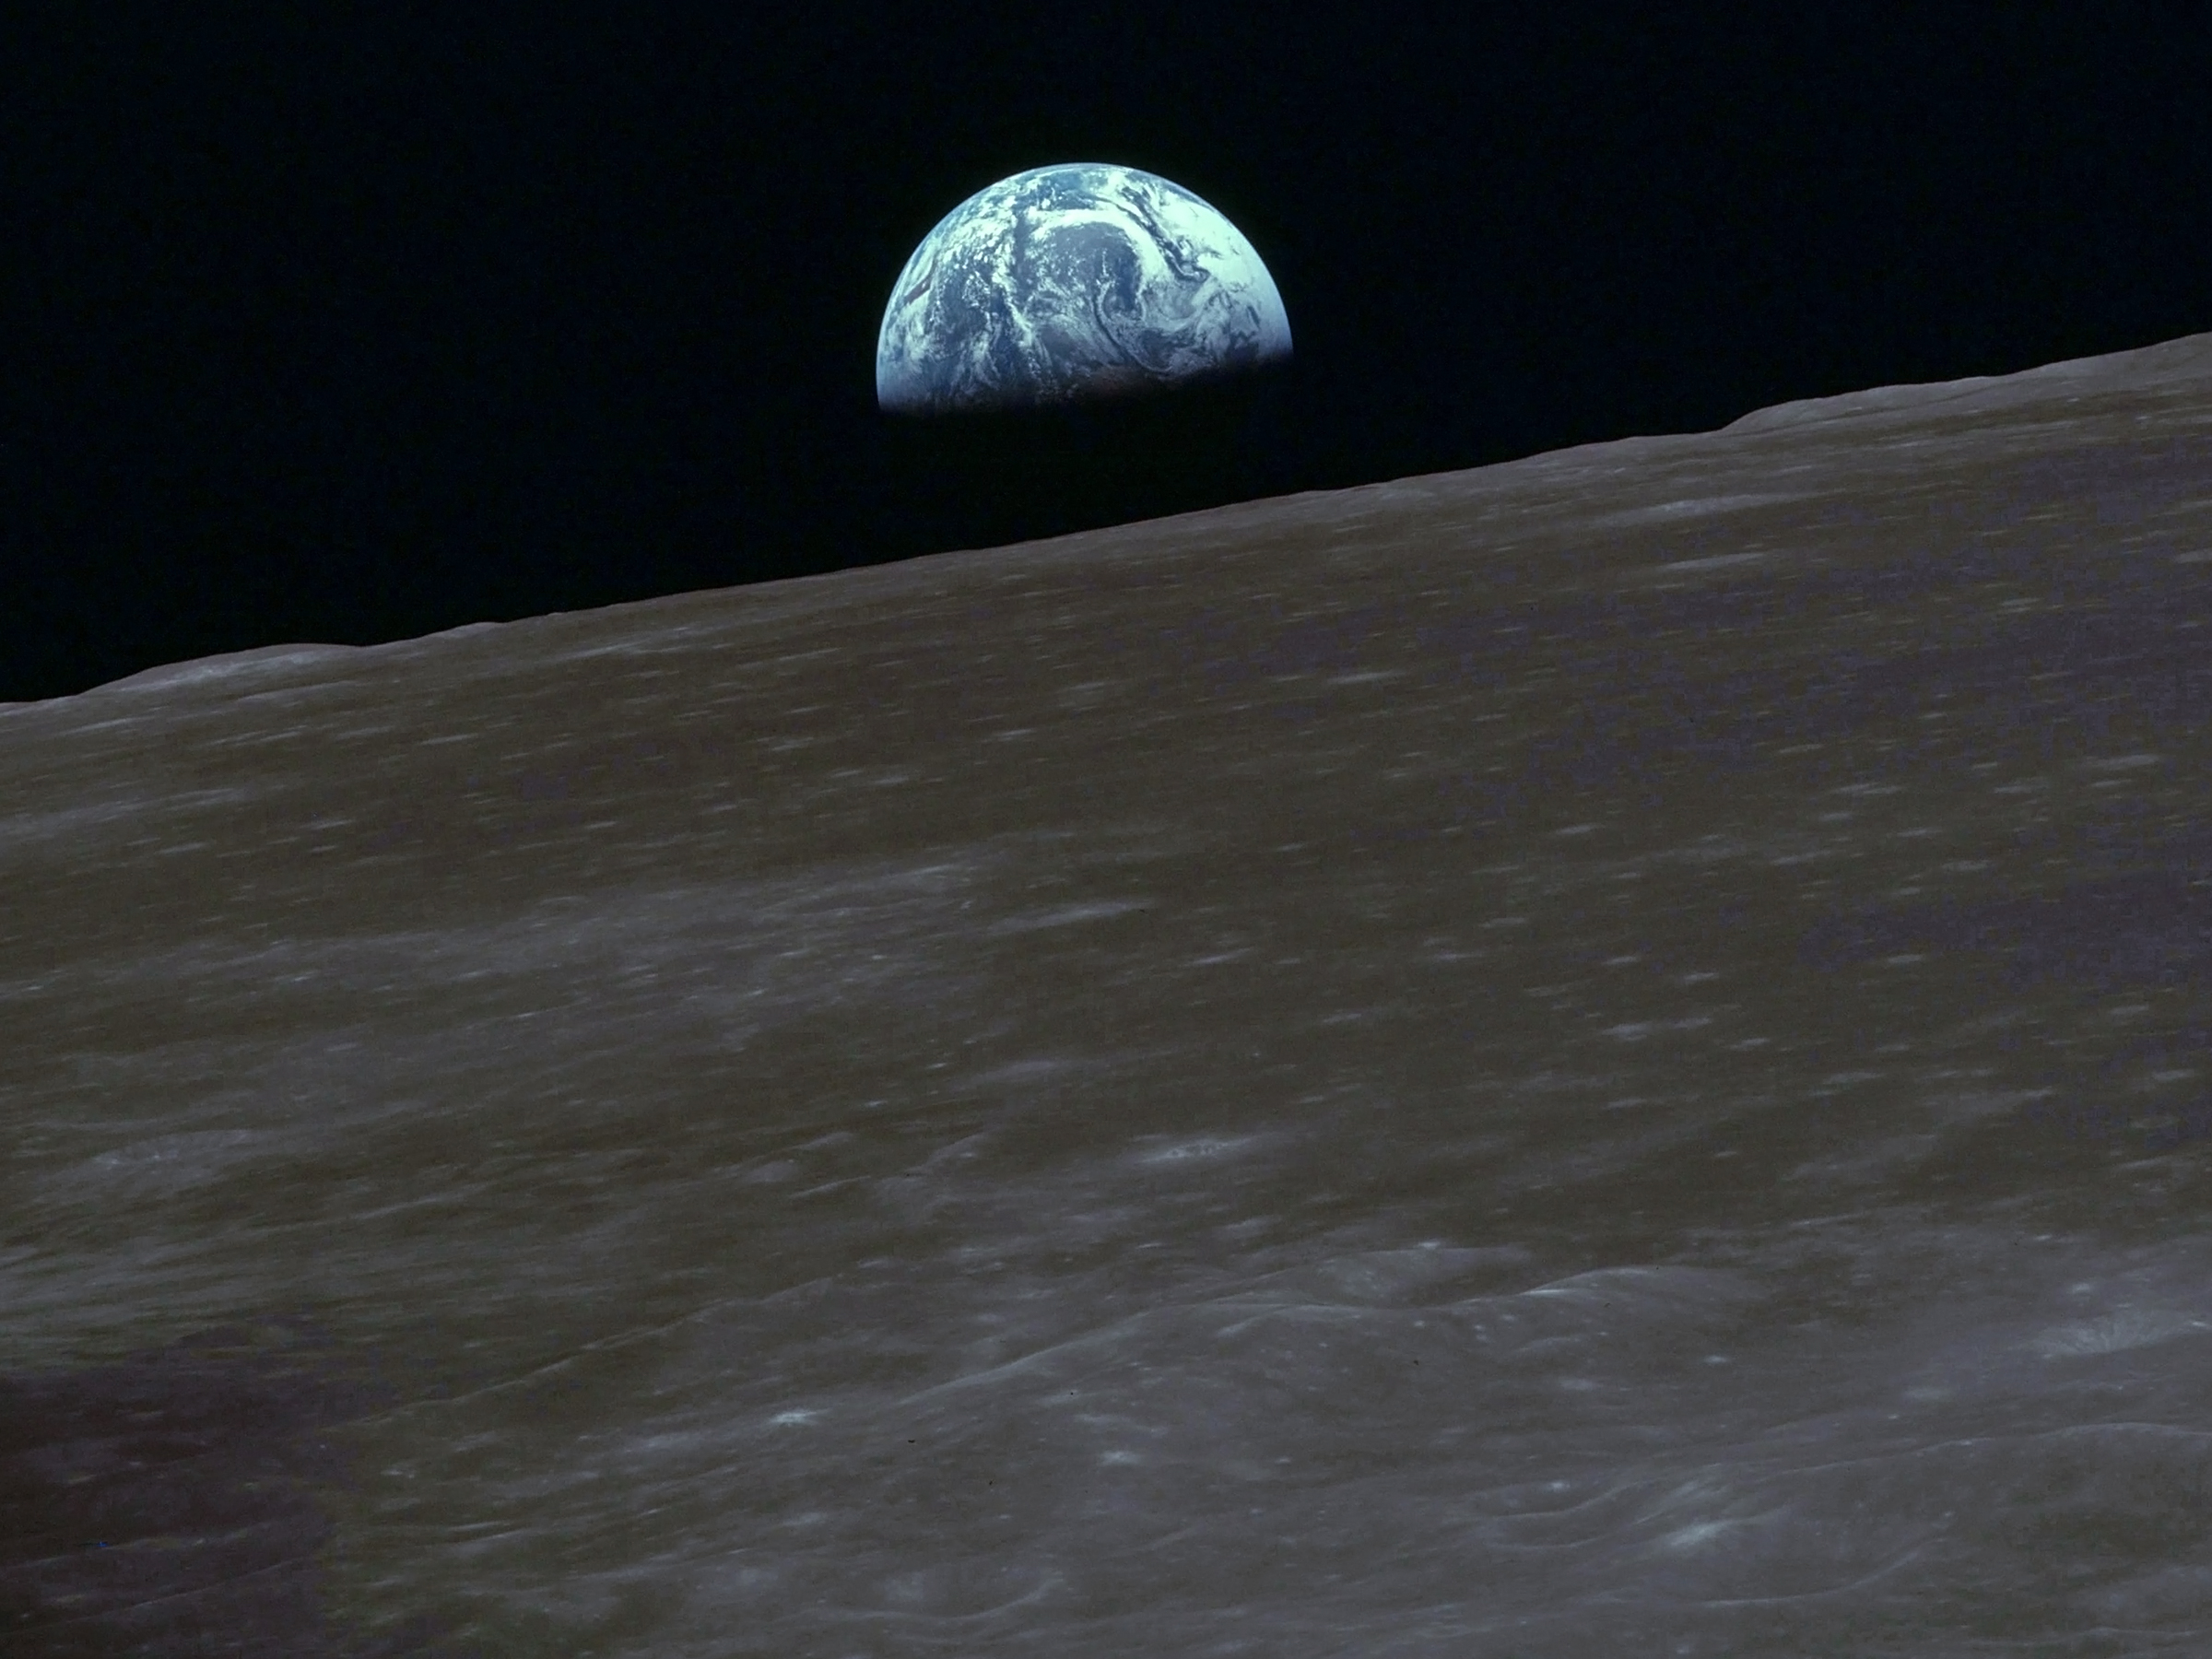 Could An Asteroid Impact Knock The Moon Into Earth? [Video]